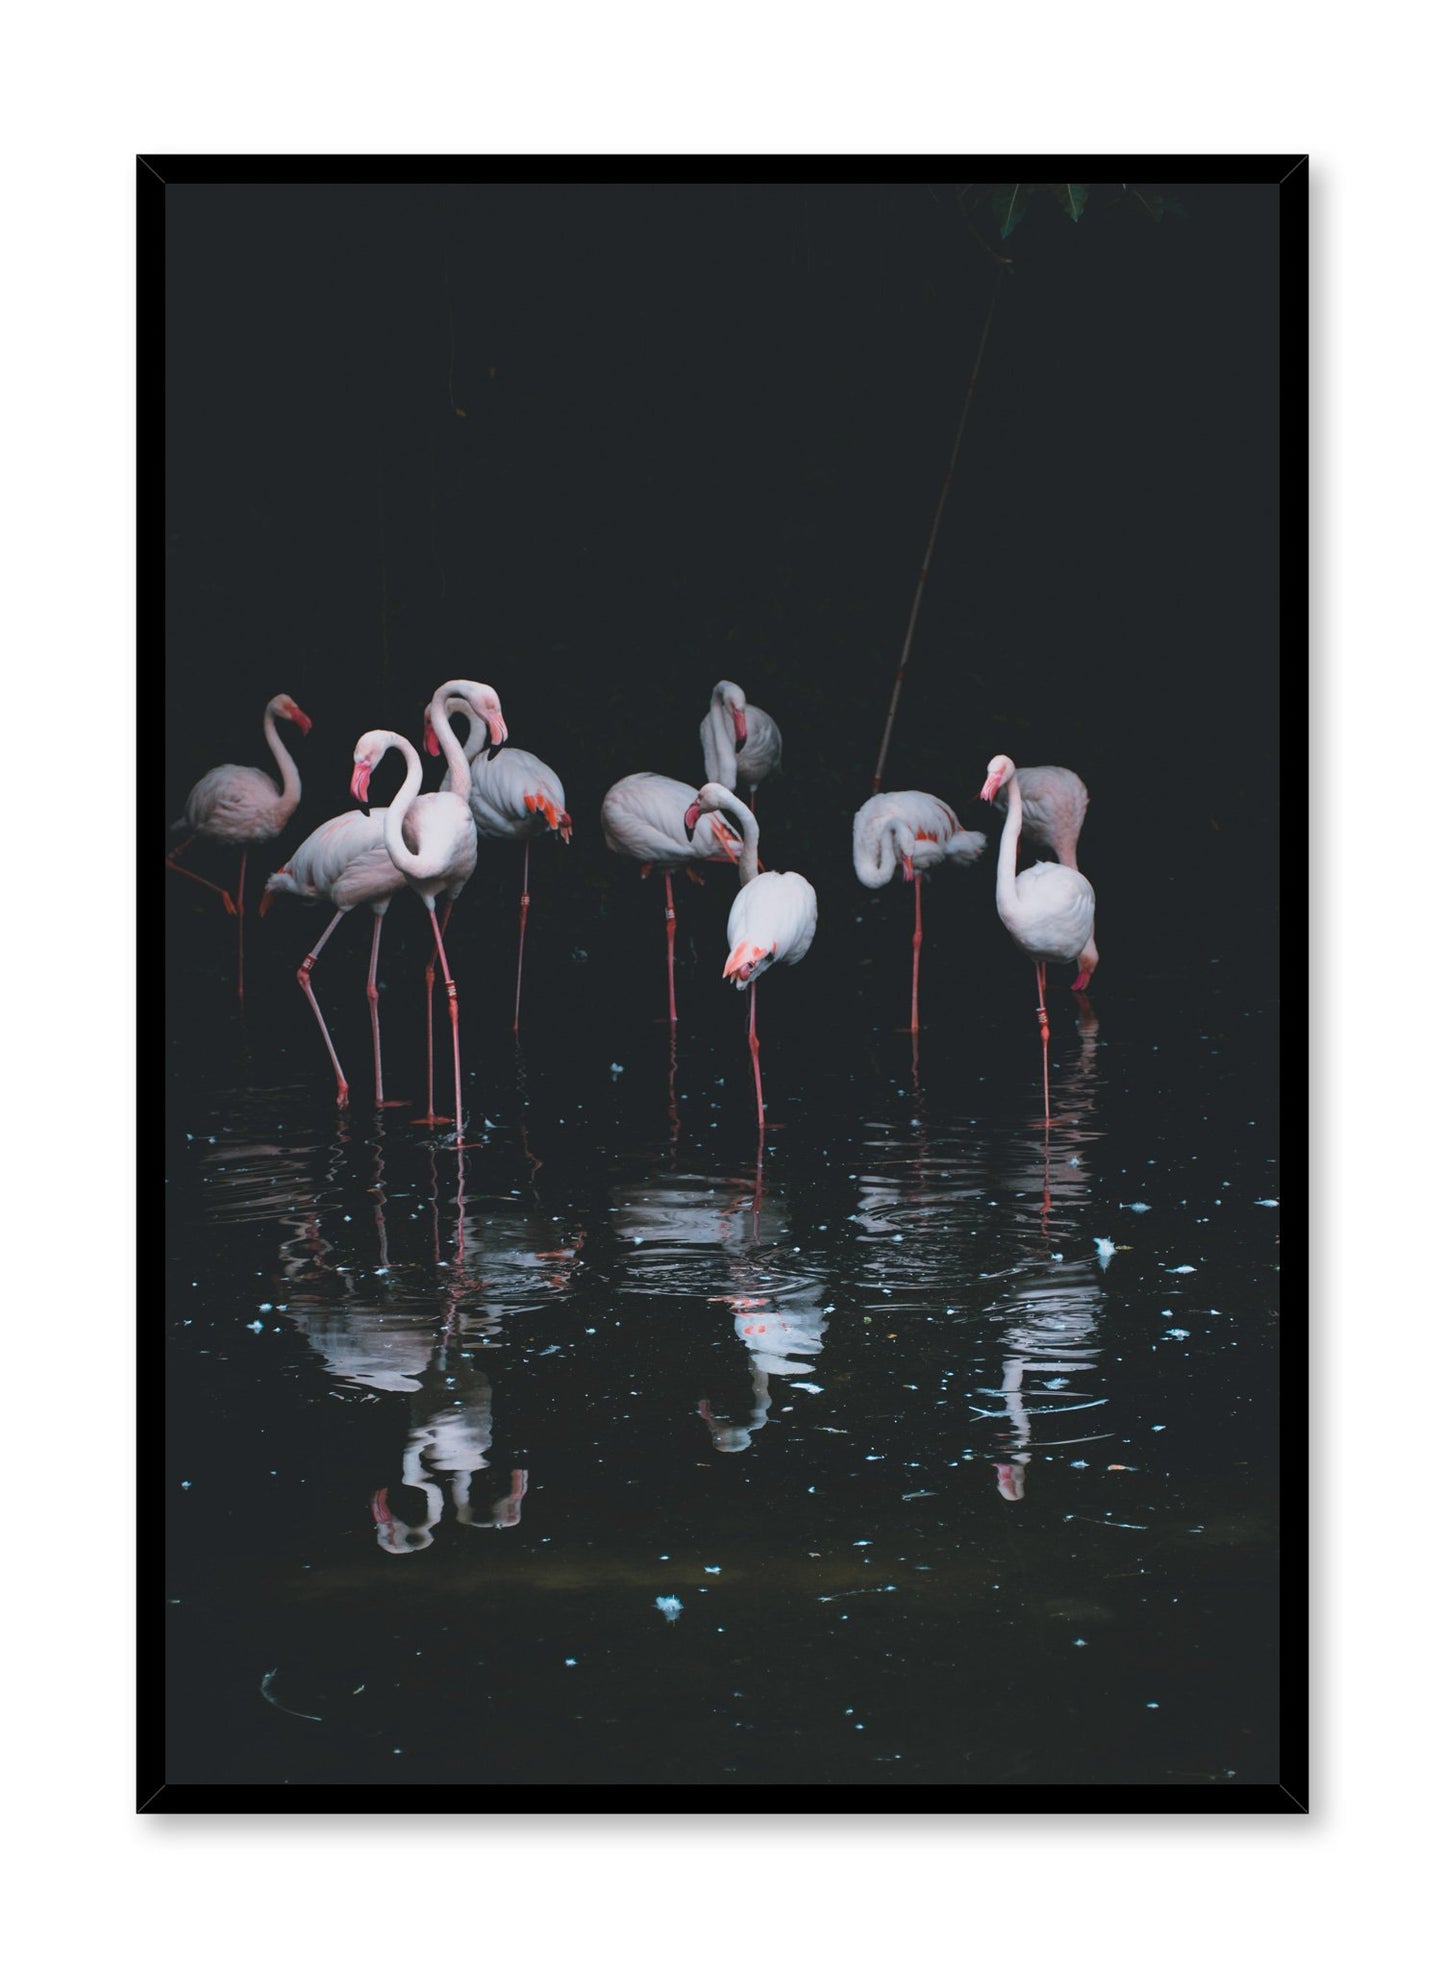 Modern minimalist poster by Opposite Wall with Flamingos